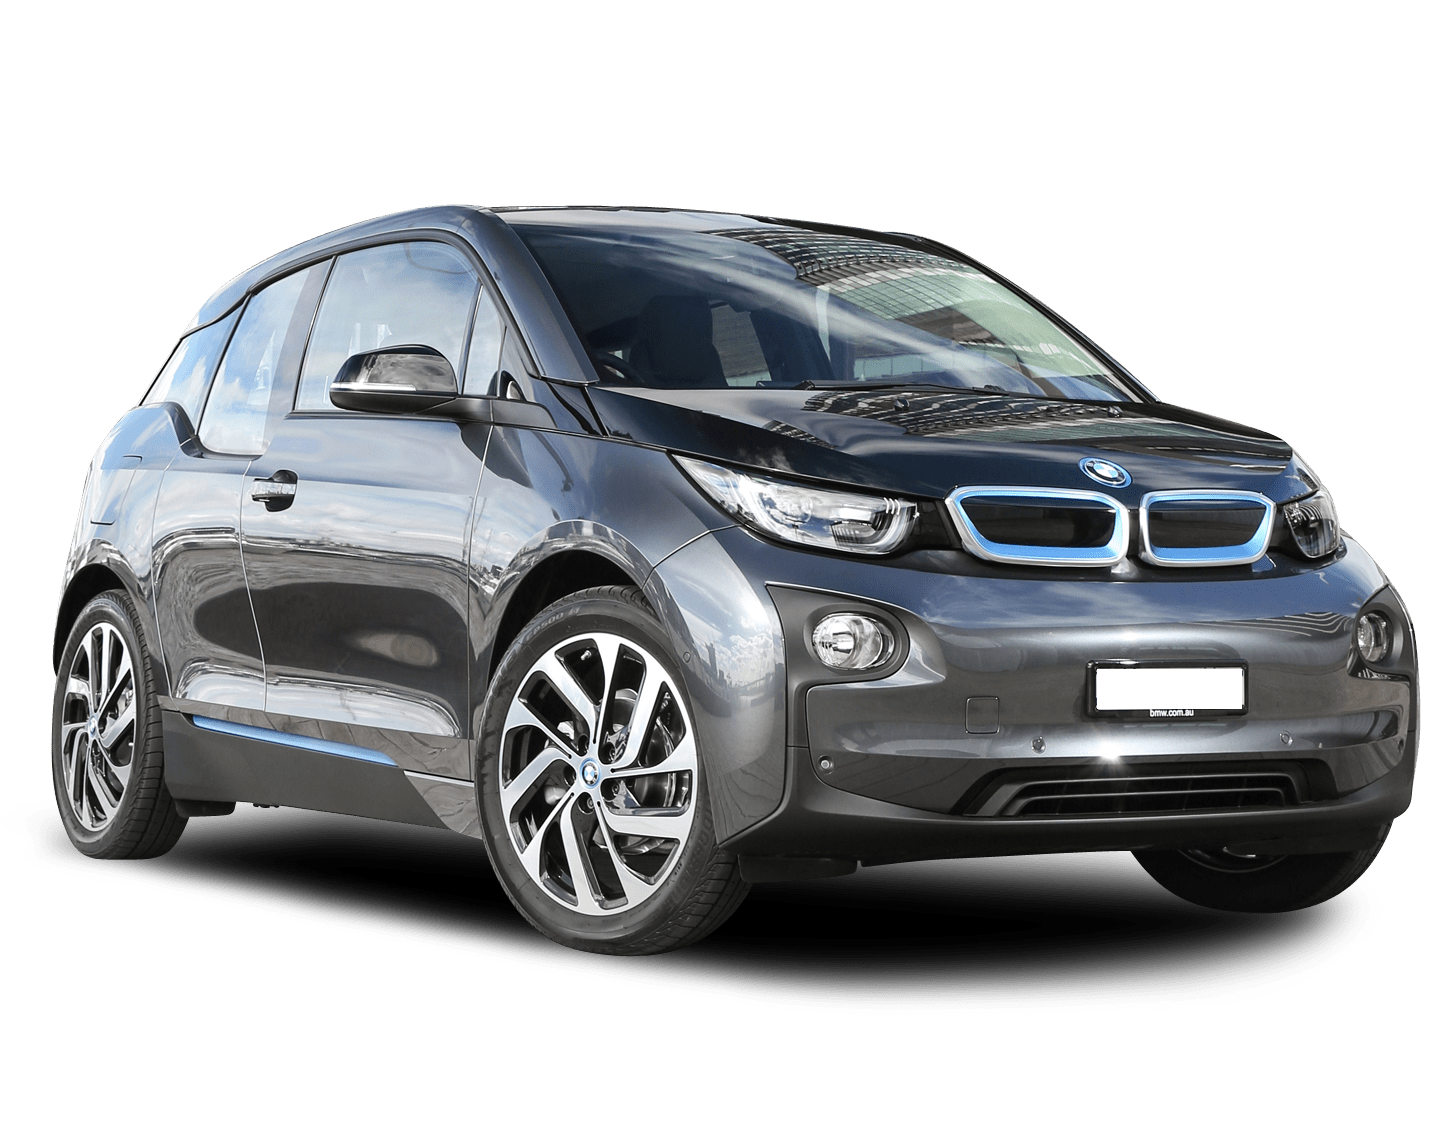 The 2016 BMW i3 makes the EV attractive, Car Reviews